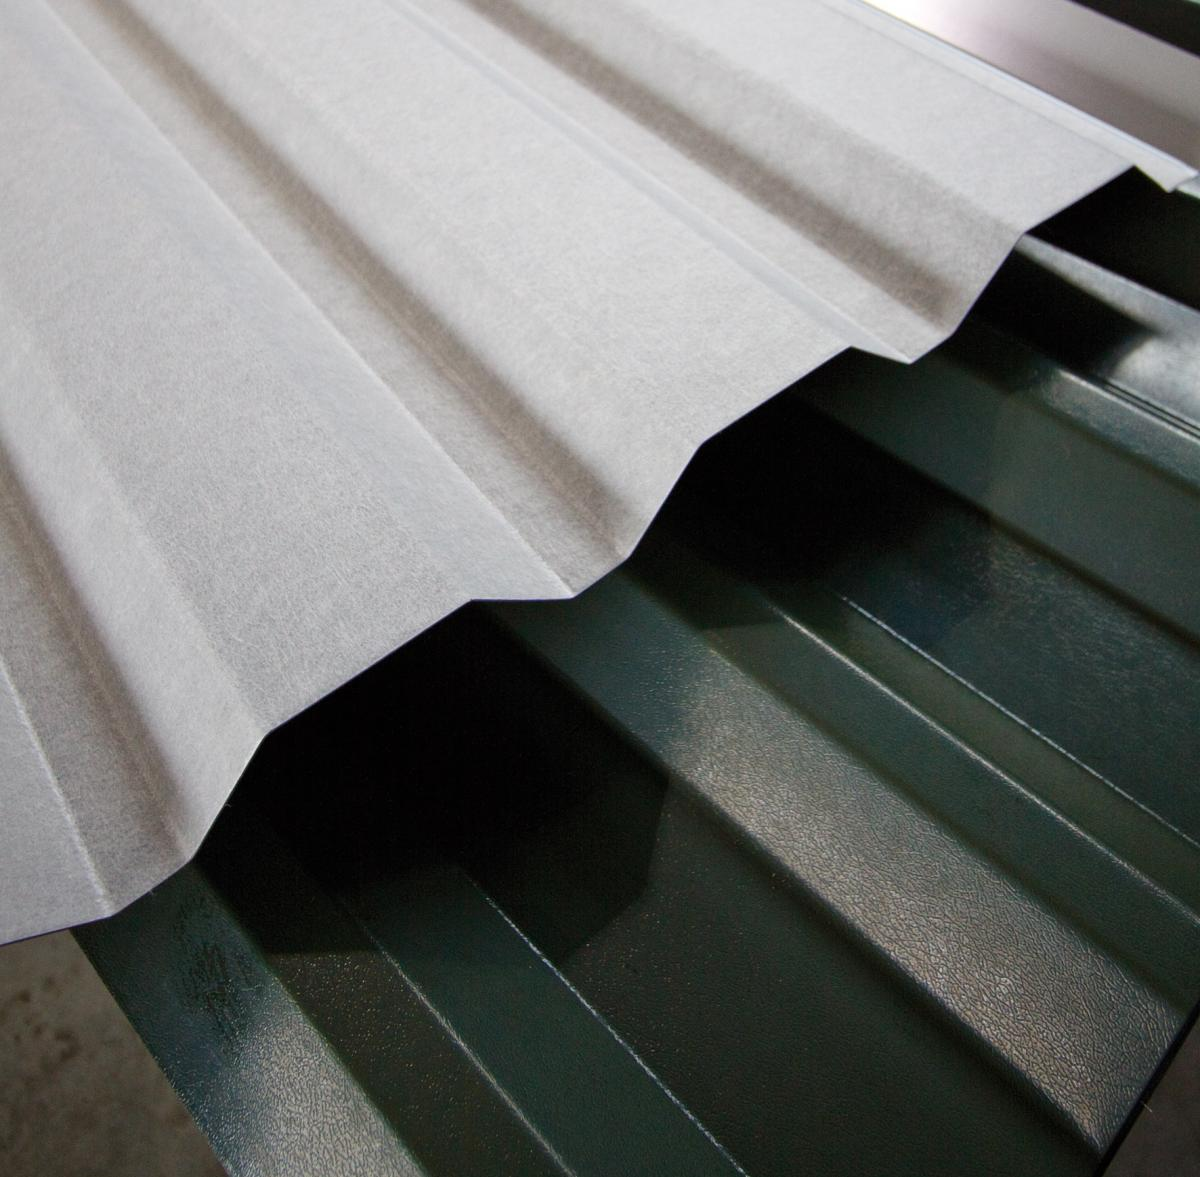 The felt material is securely adhered to the steel sheeting